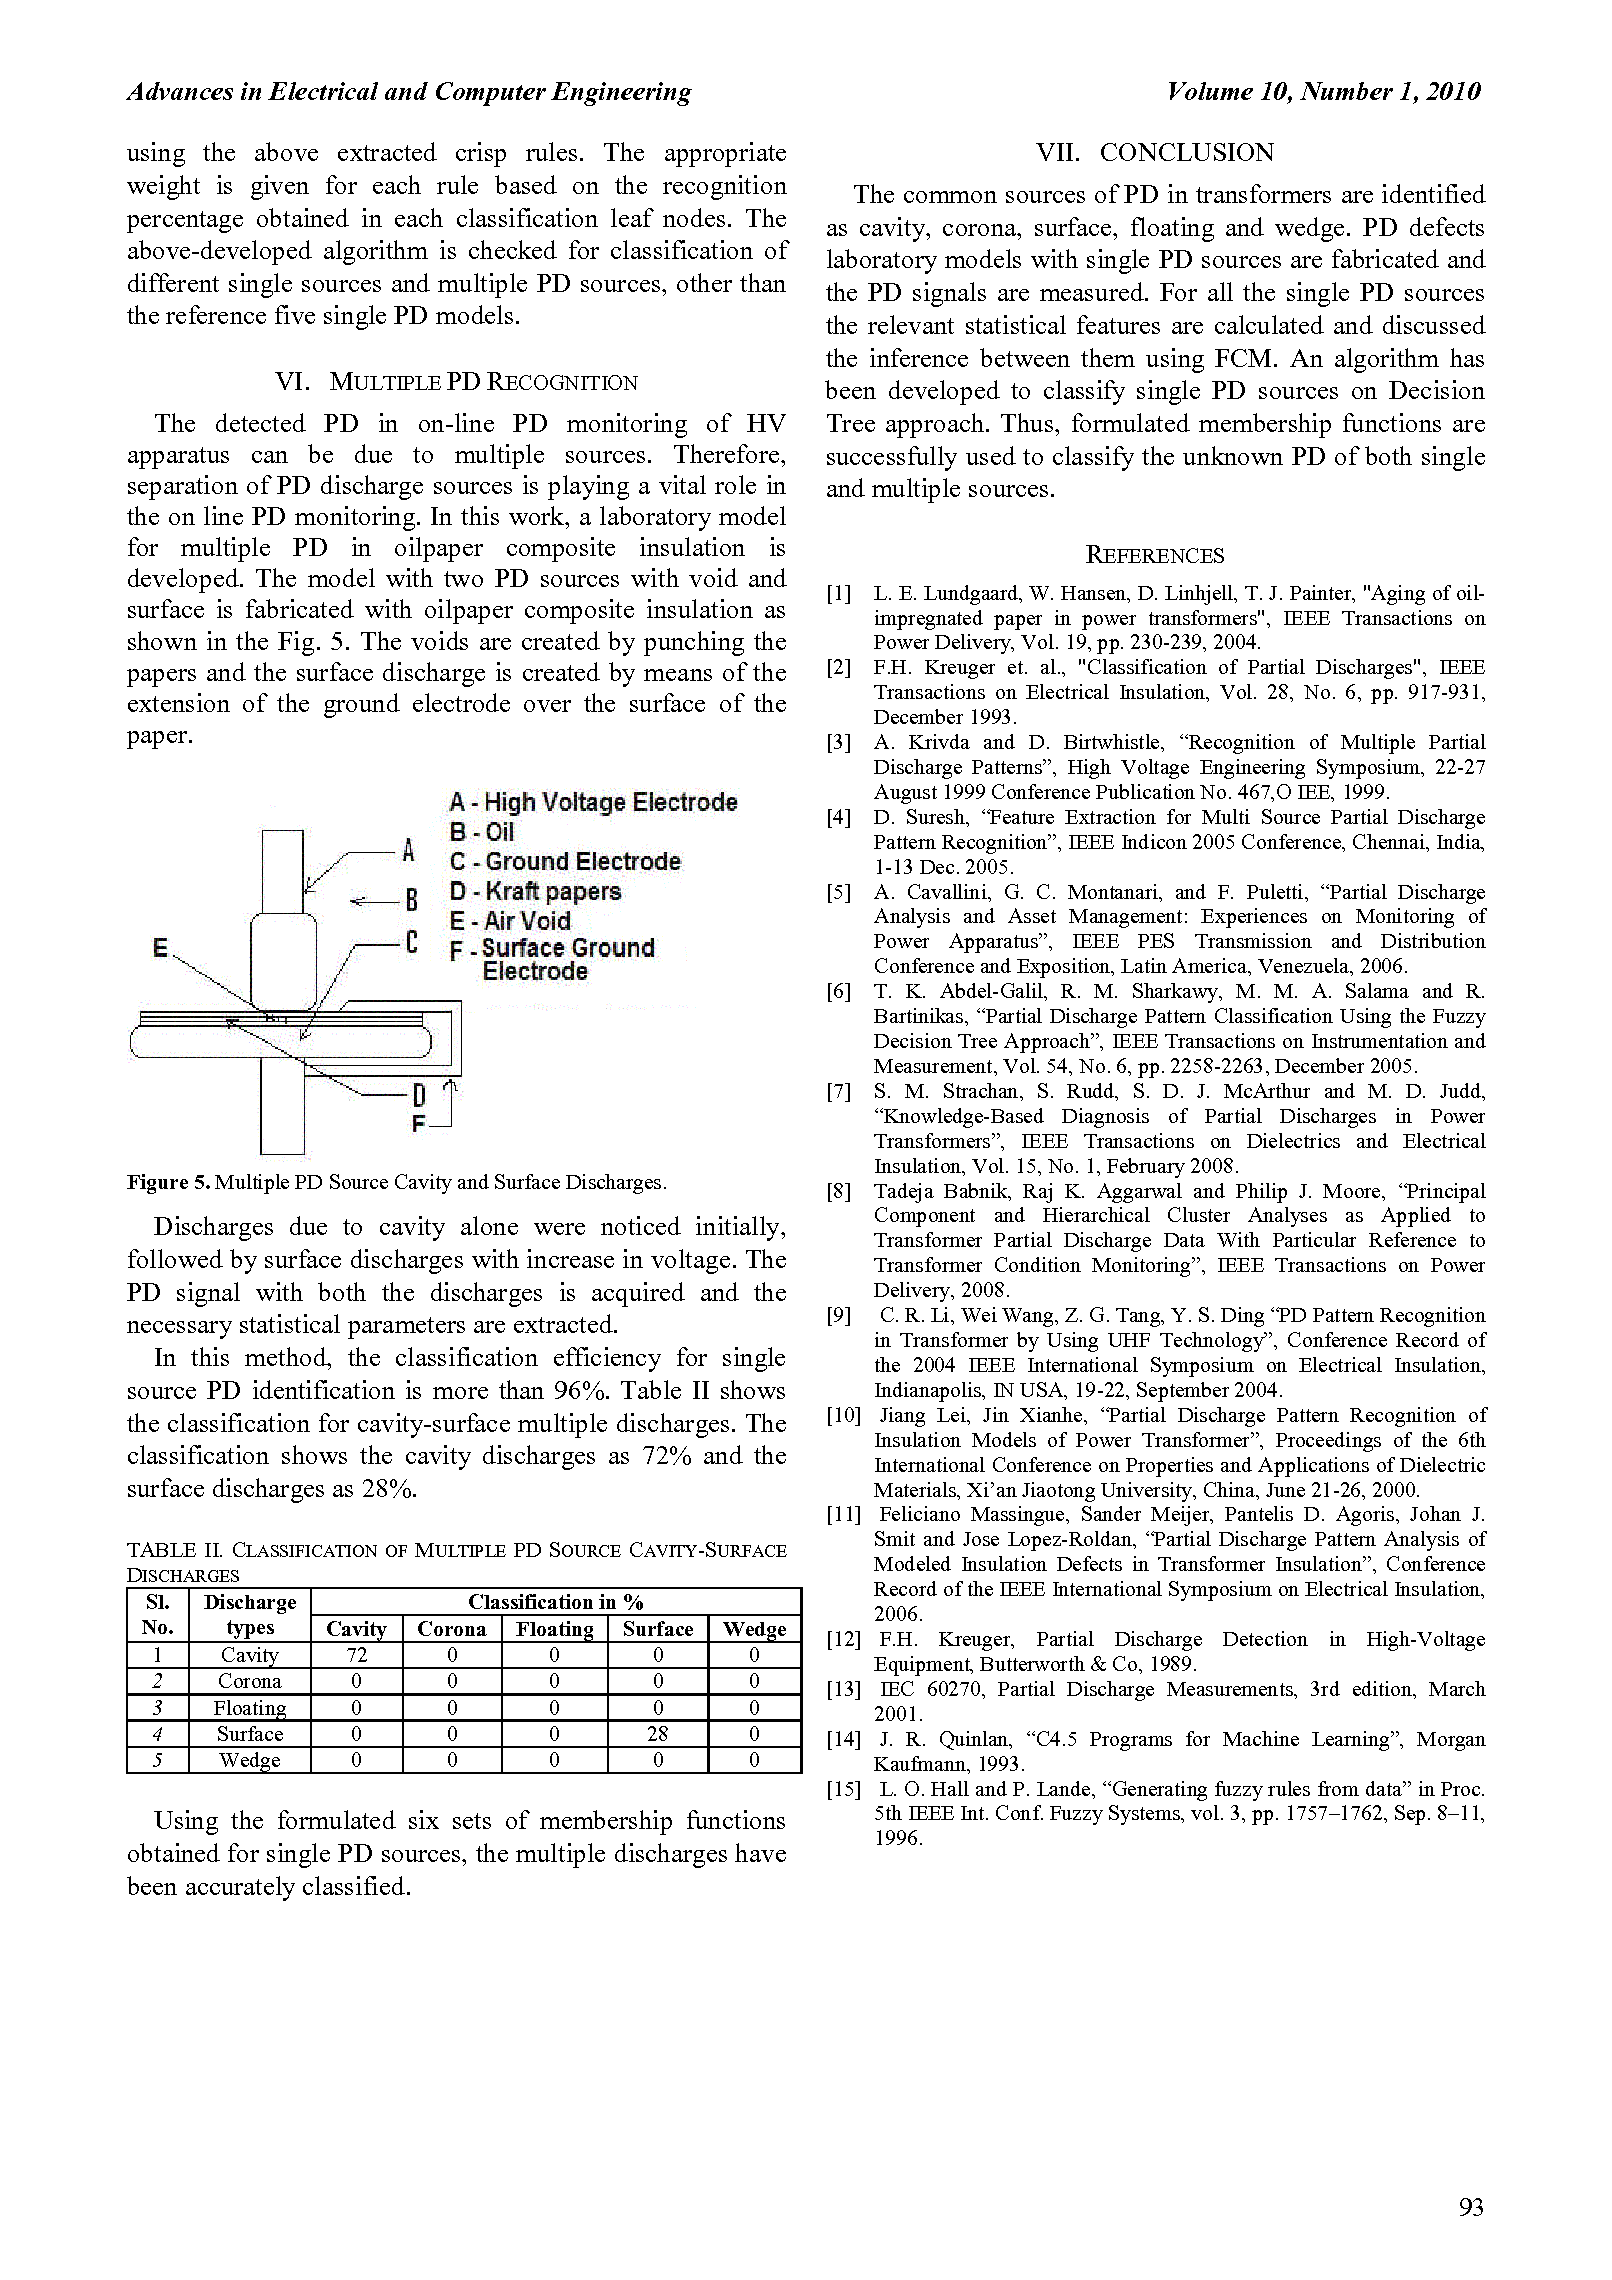 PDF Quickview for paper with DOI:10.4316/AECE.2010.01016